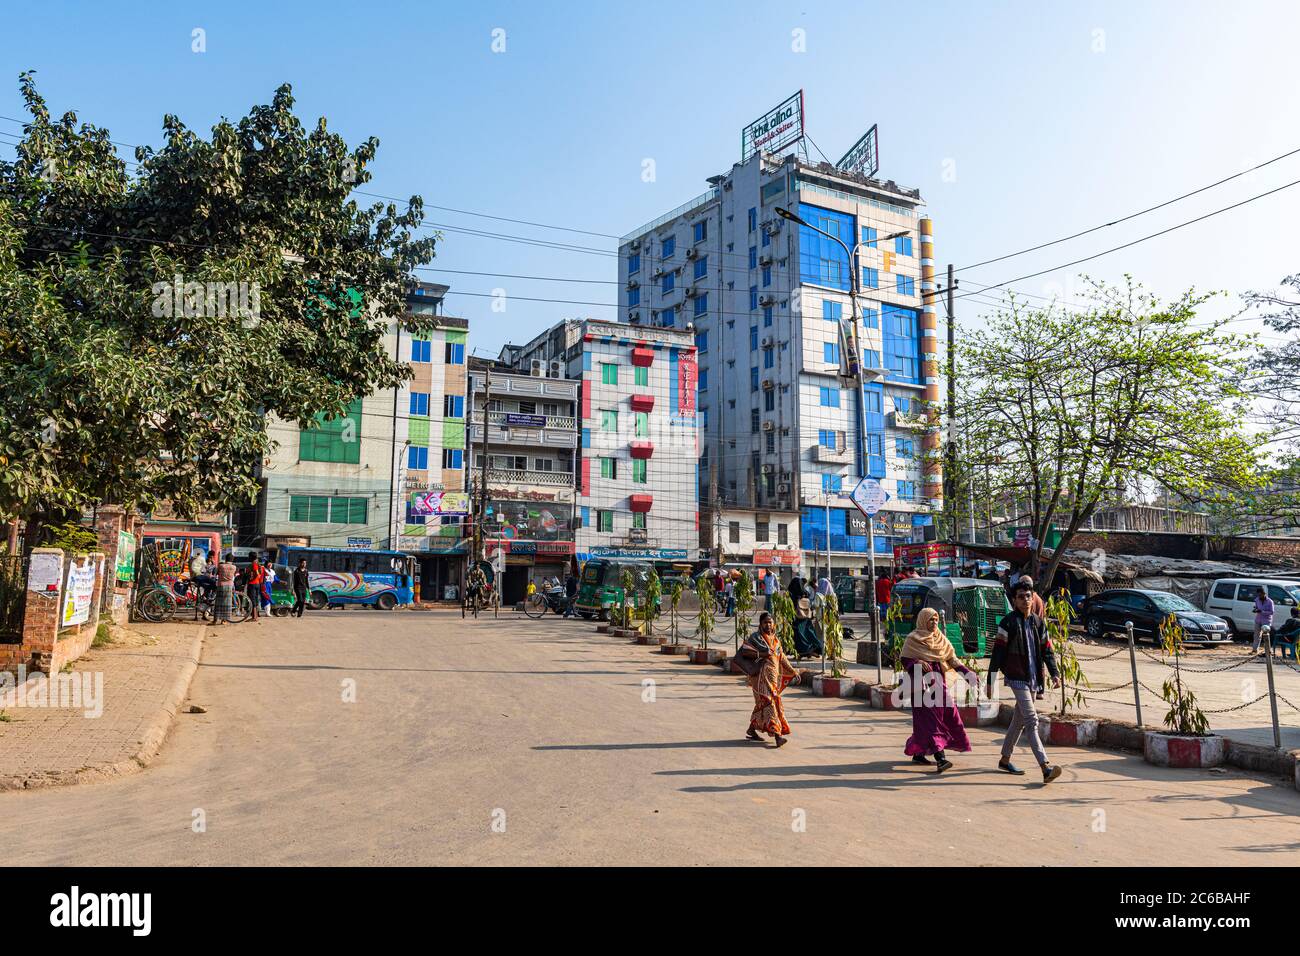 Chittagong City High Resolution Stock Photography and Images ...